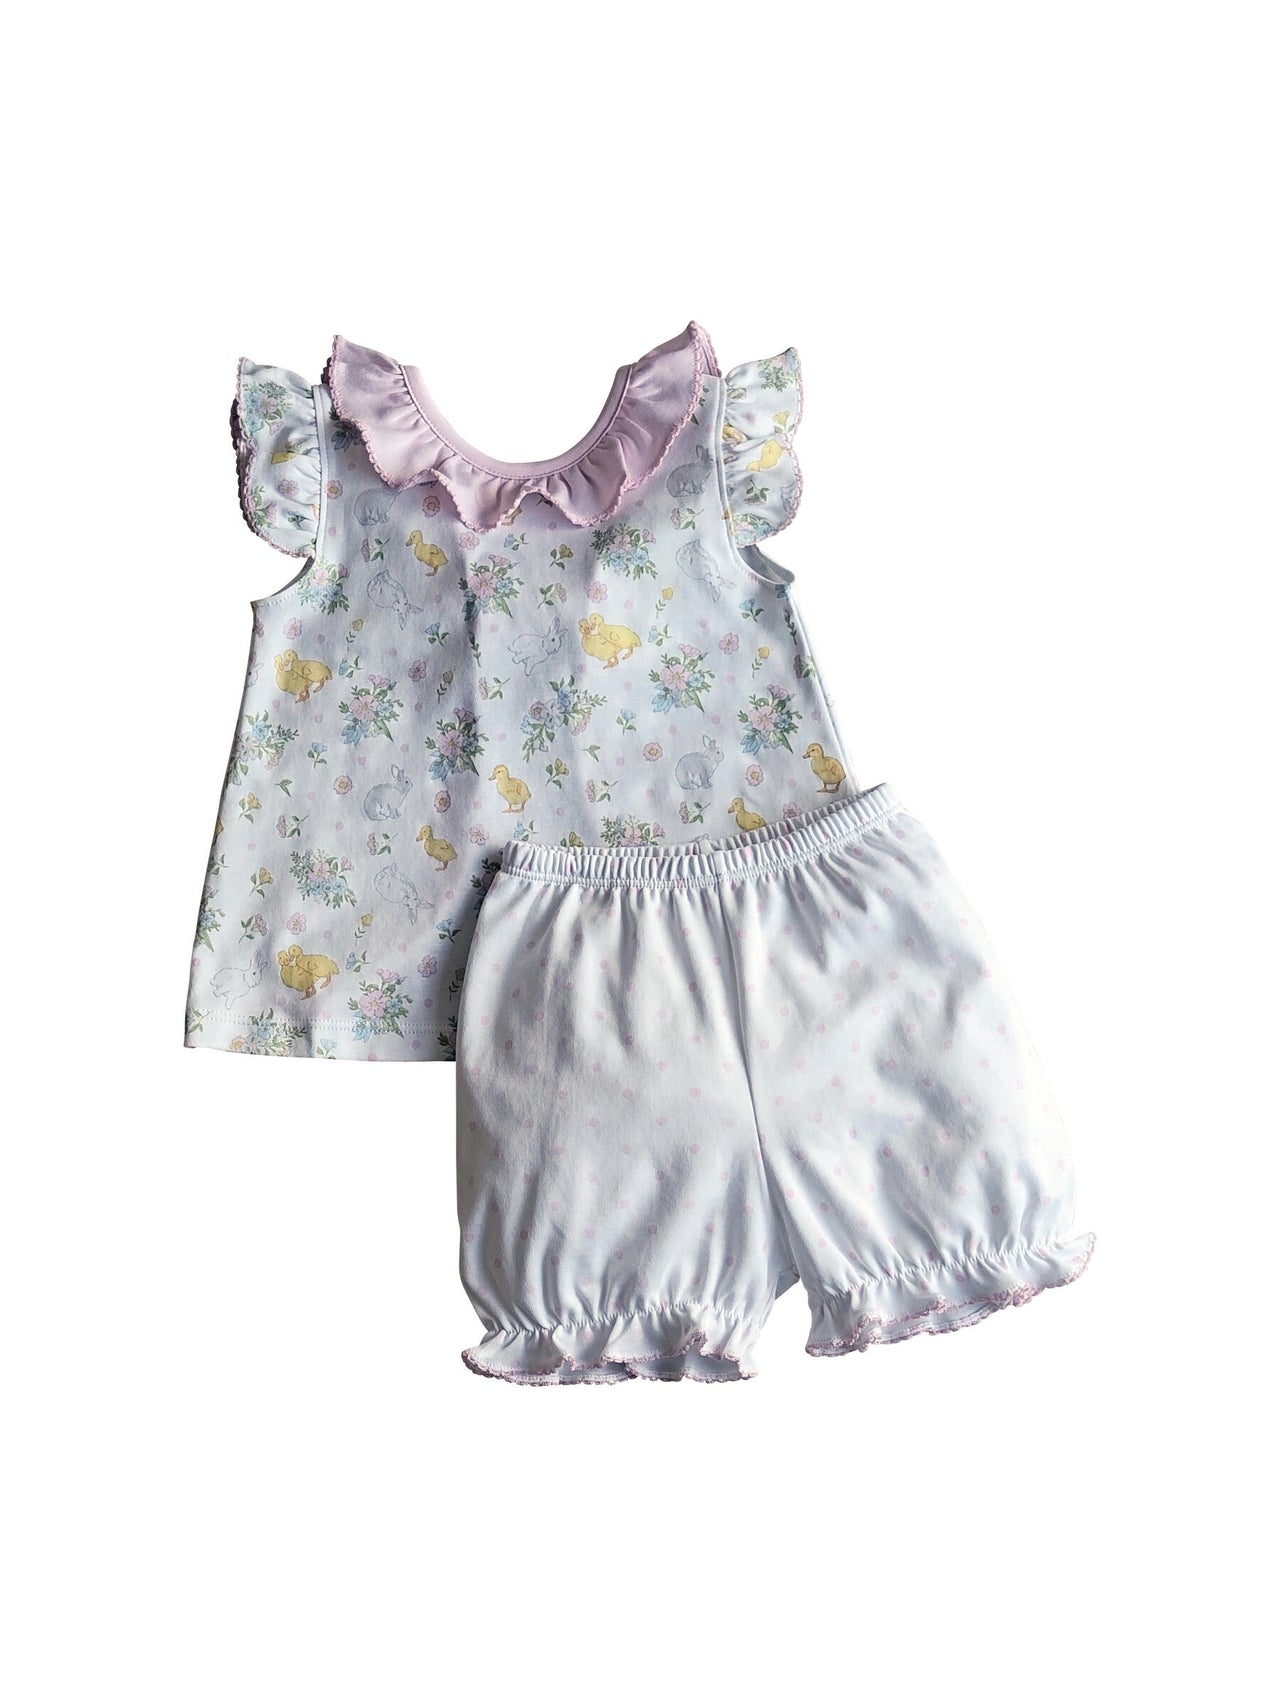 Marco & Lizzy Easter Popover Bloomer Set  M-23-009 5102